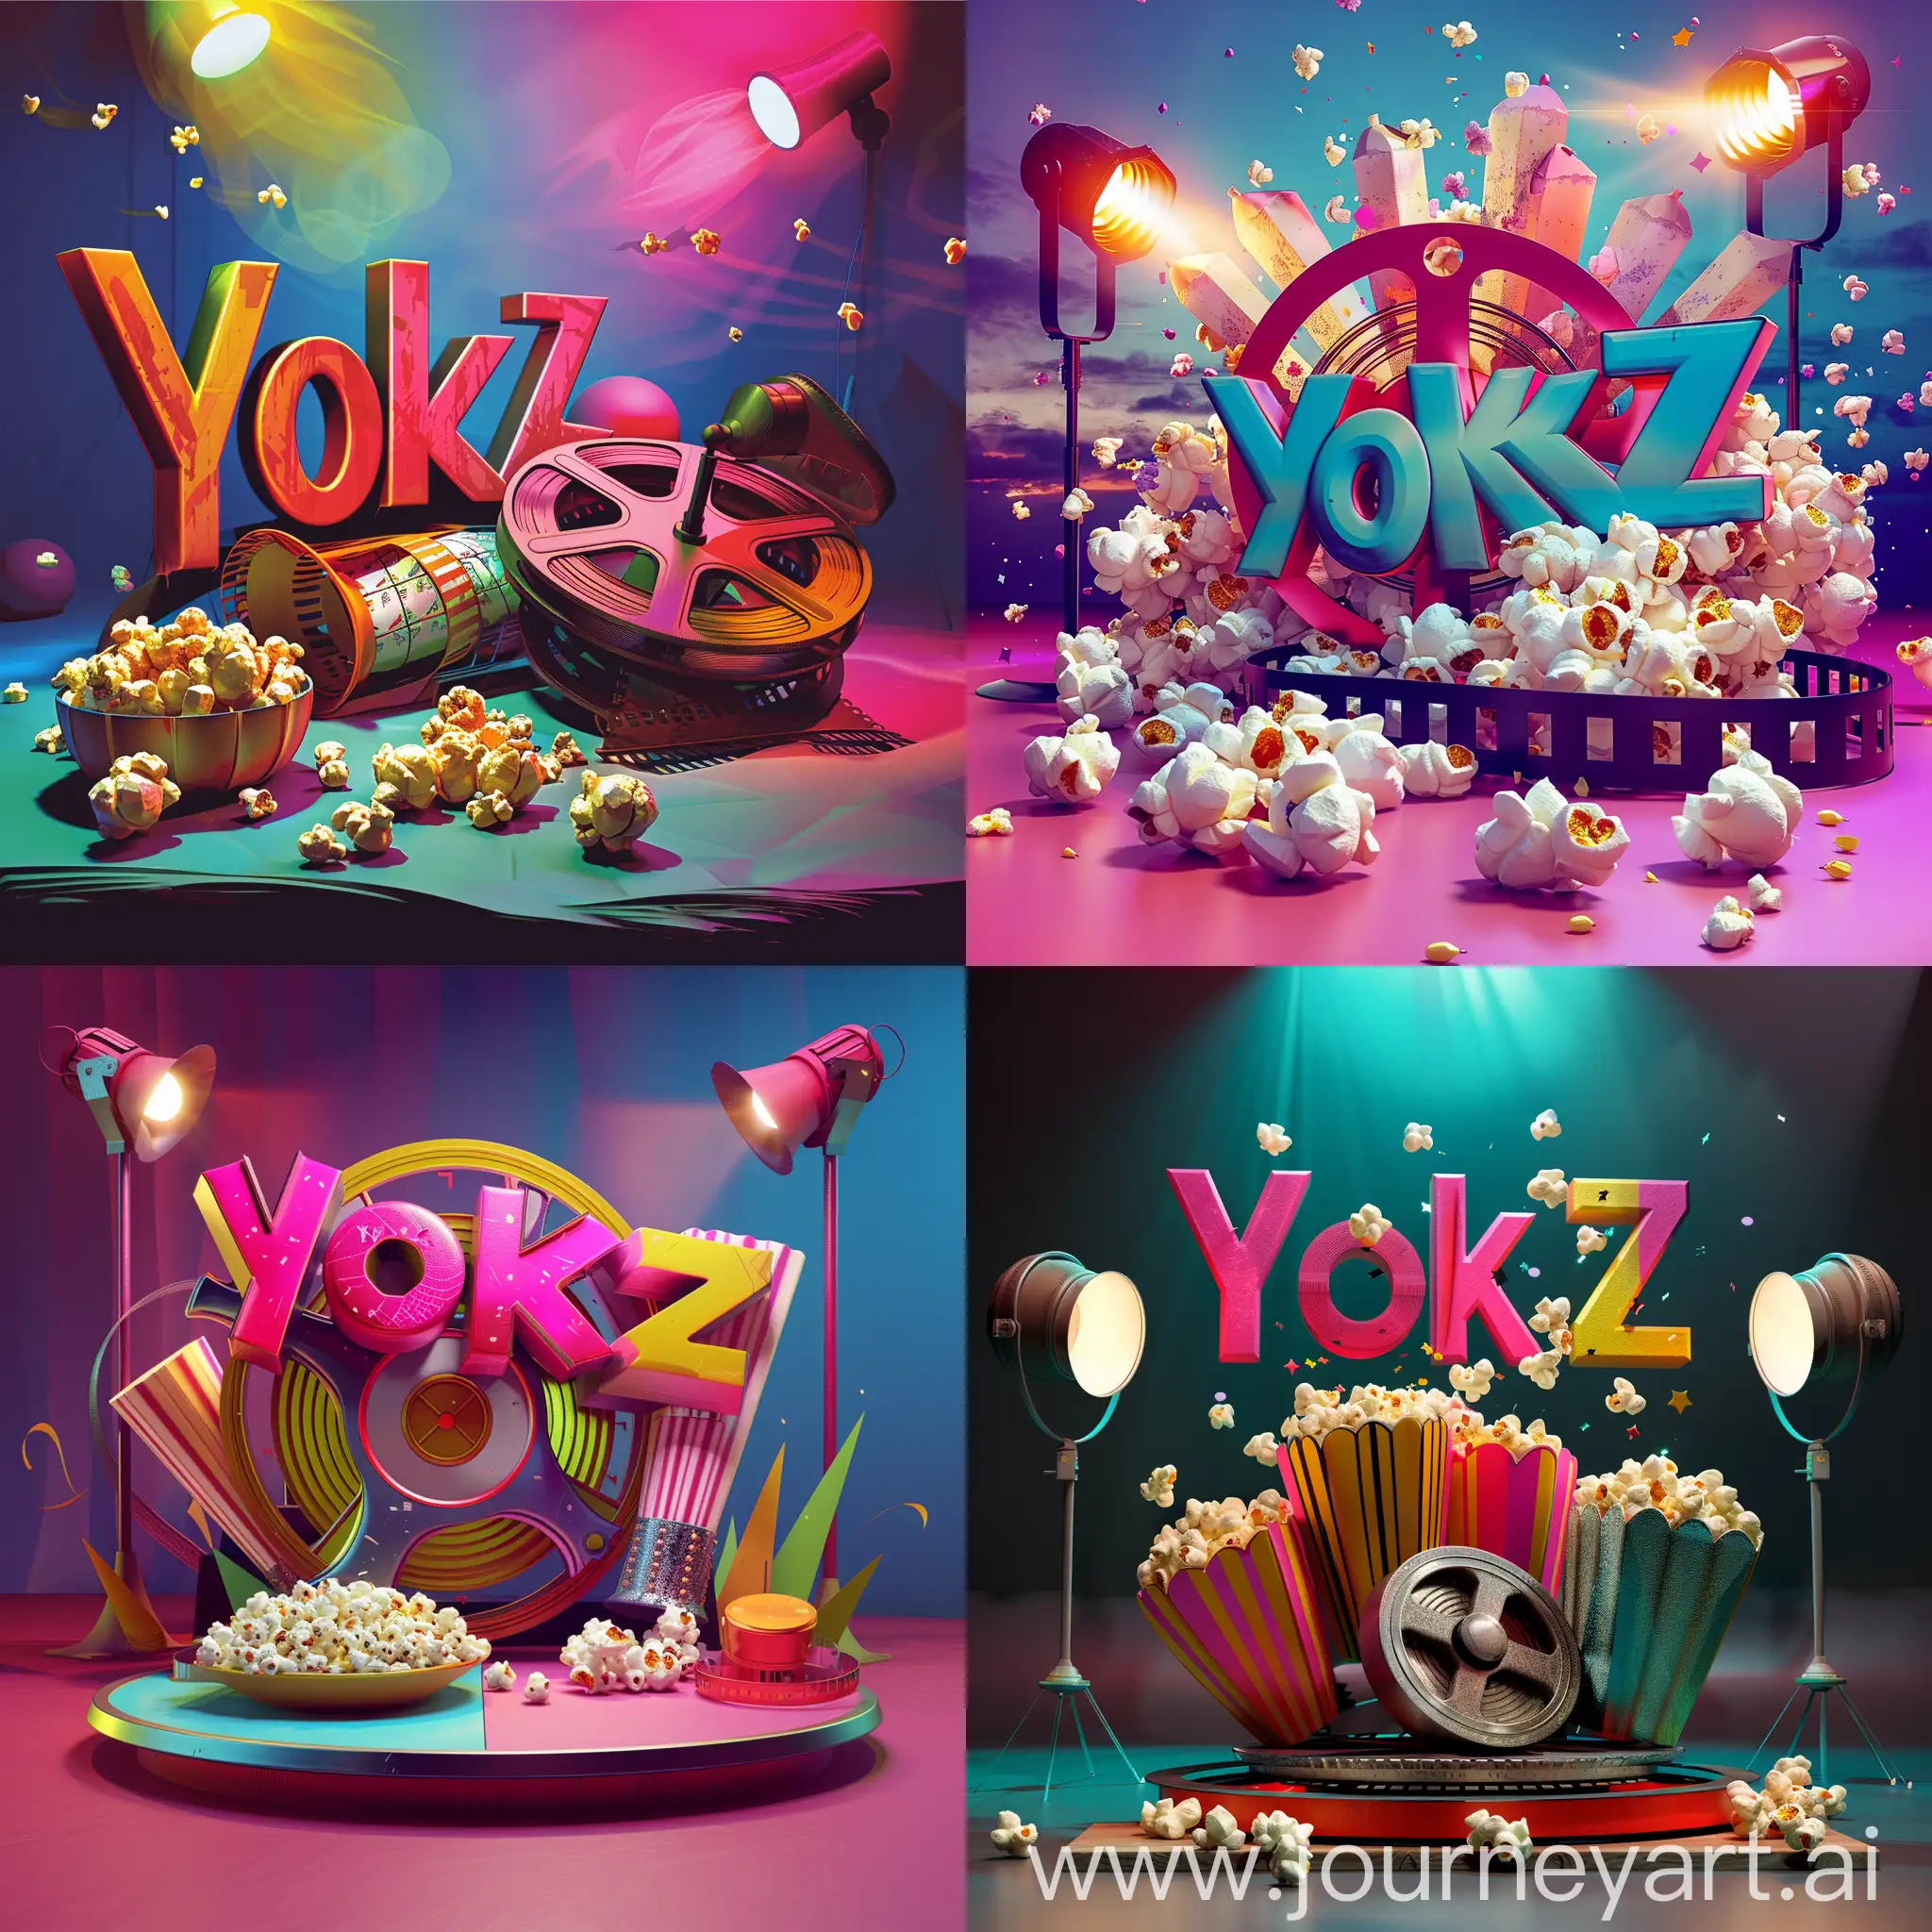 Vibrant-Yokz-Screening-Profile-Picture-with-Bold-Colors-and-Film-Reel-Motif